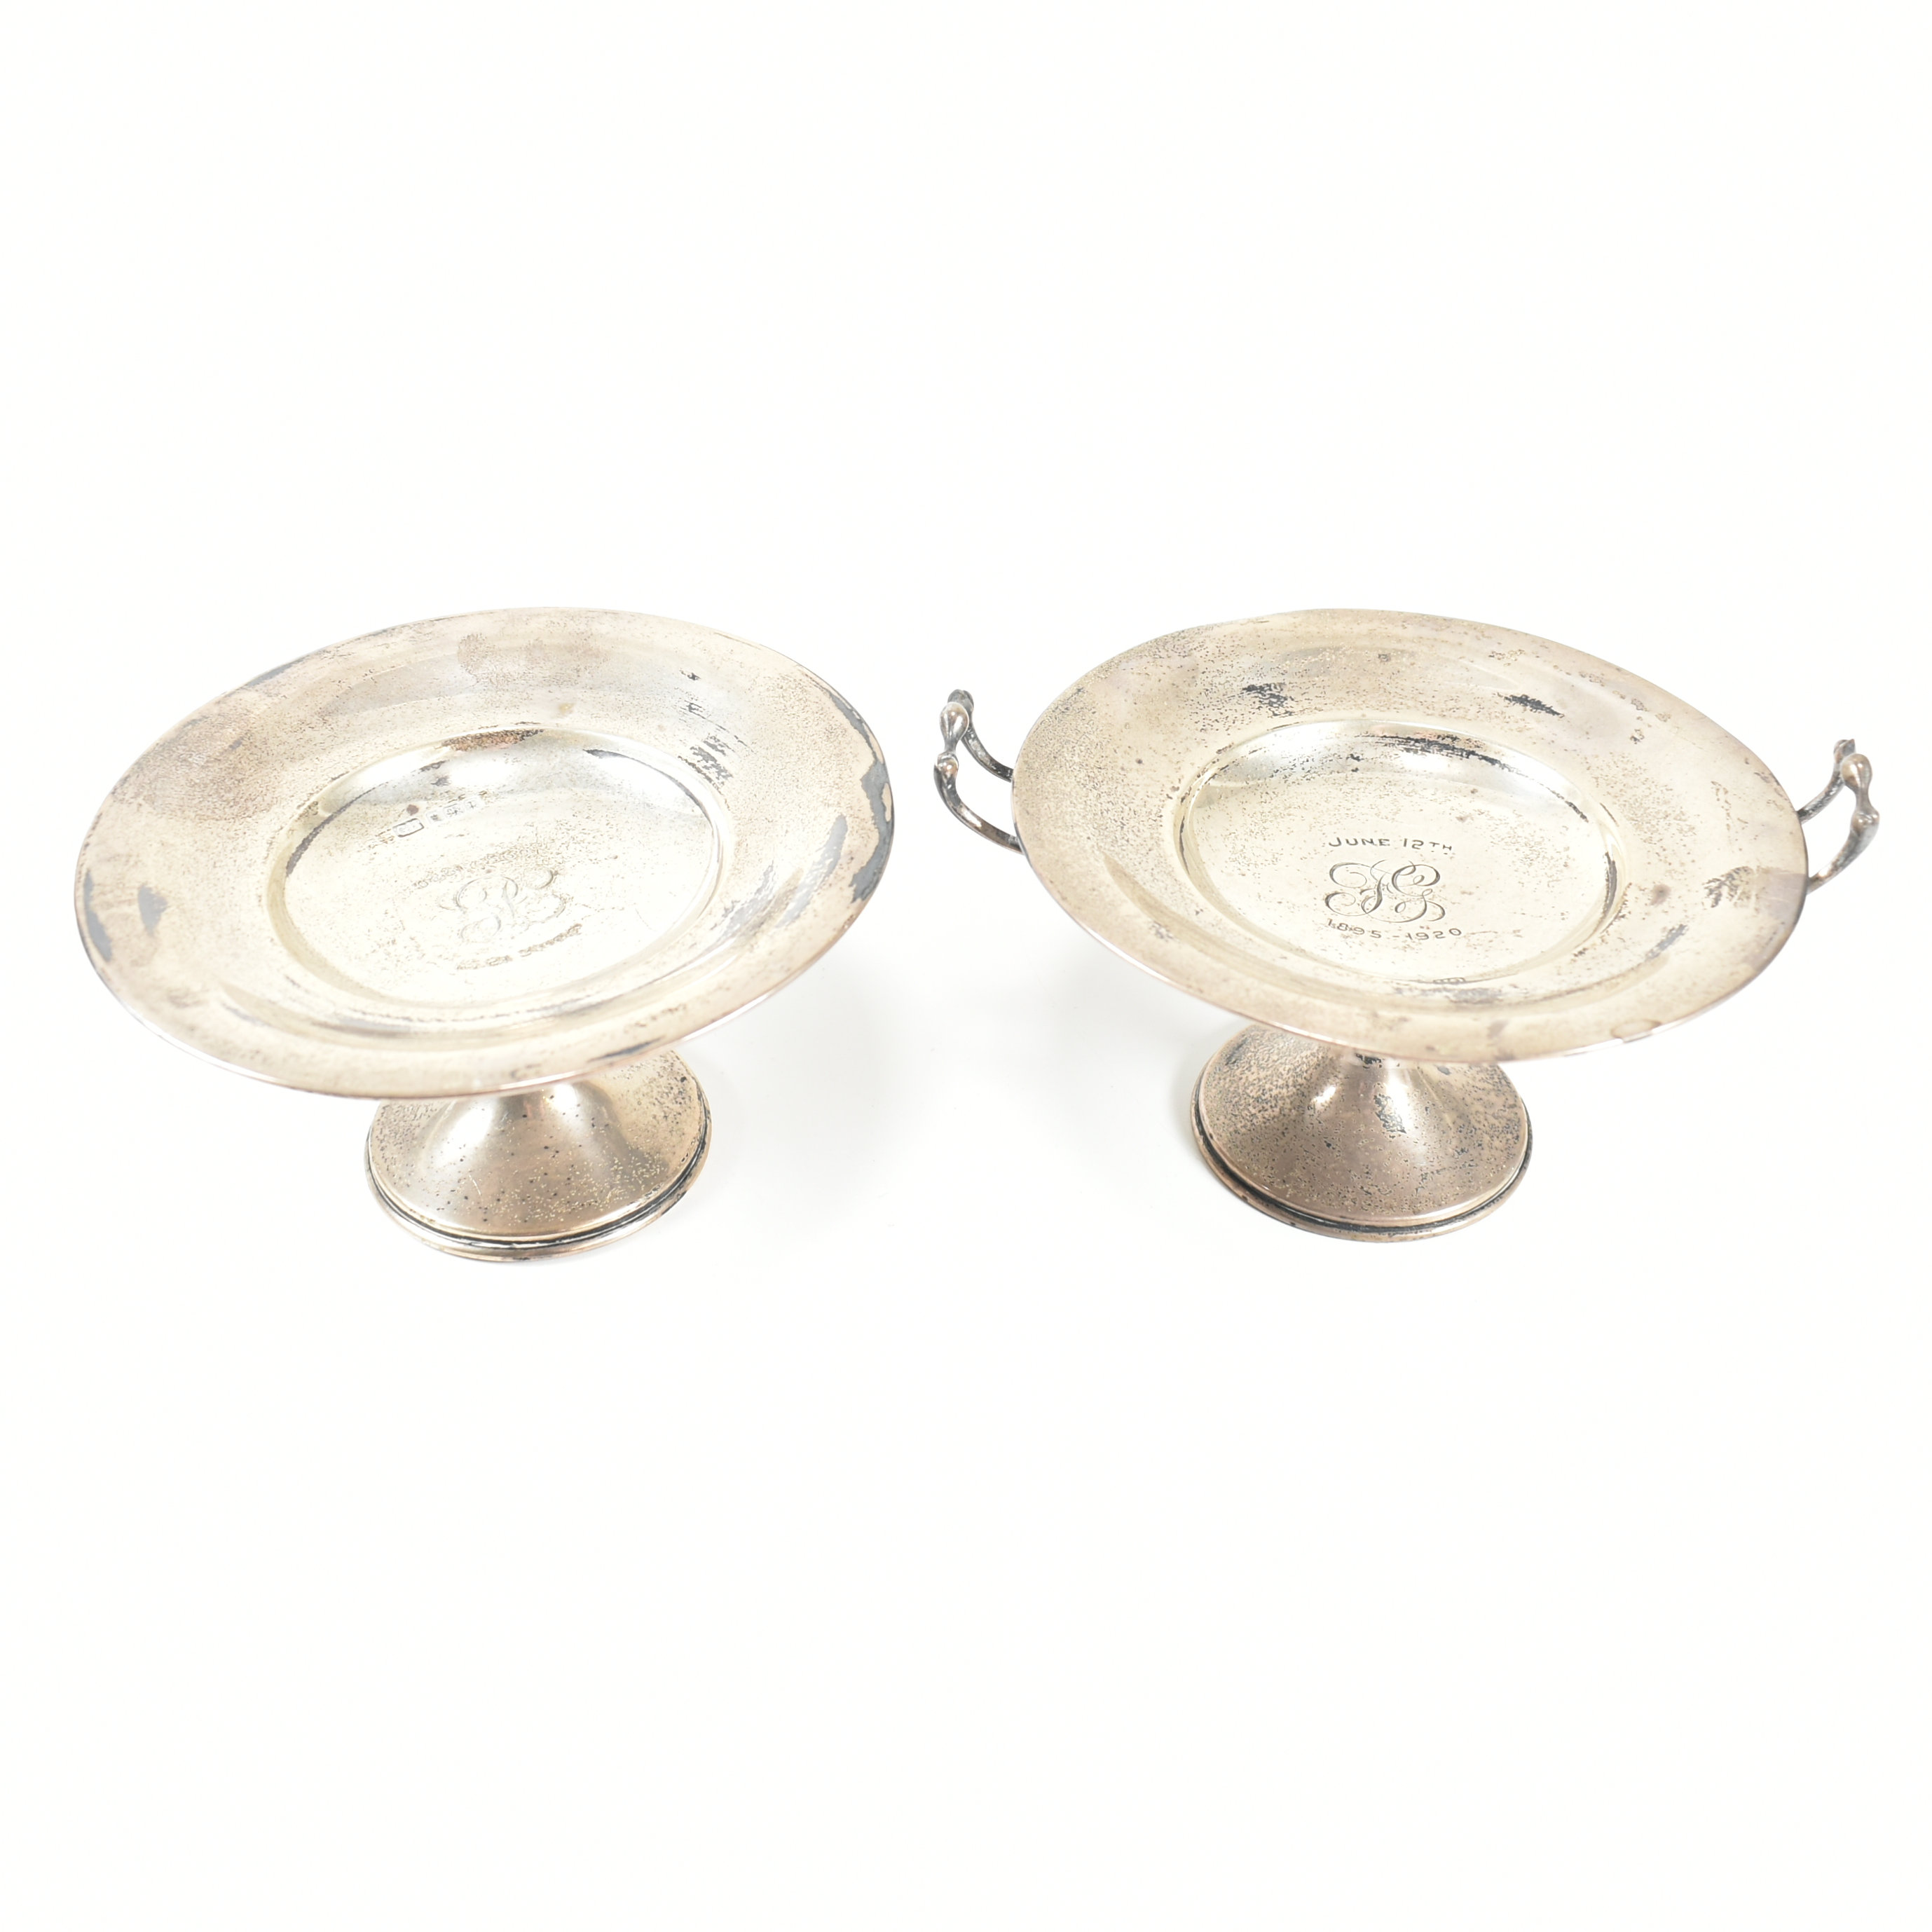 EDWARD VII HALLMARKED SILVER COMPOTE DISHES - Image 2 of 6